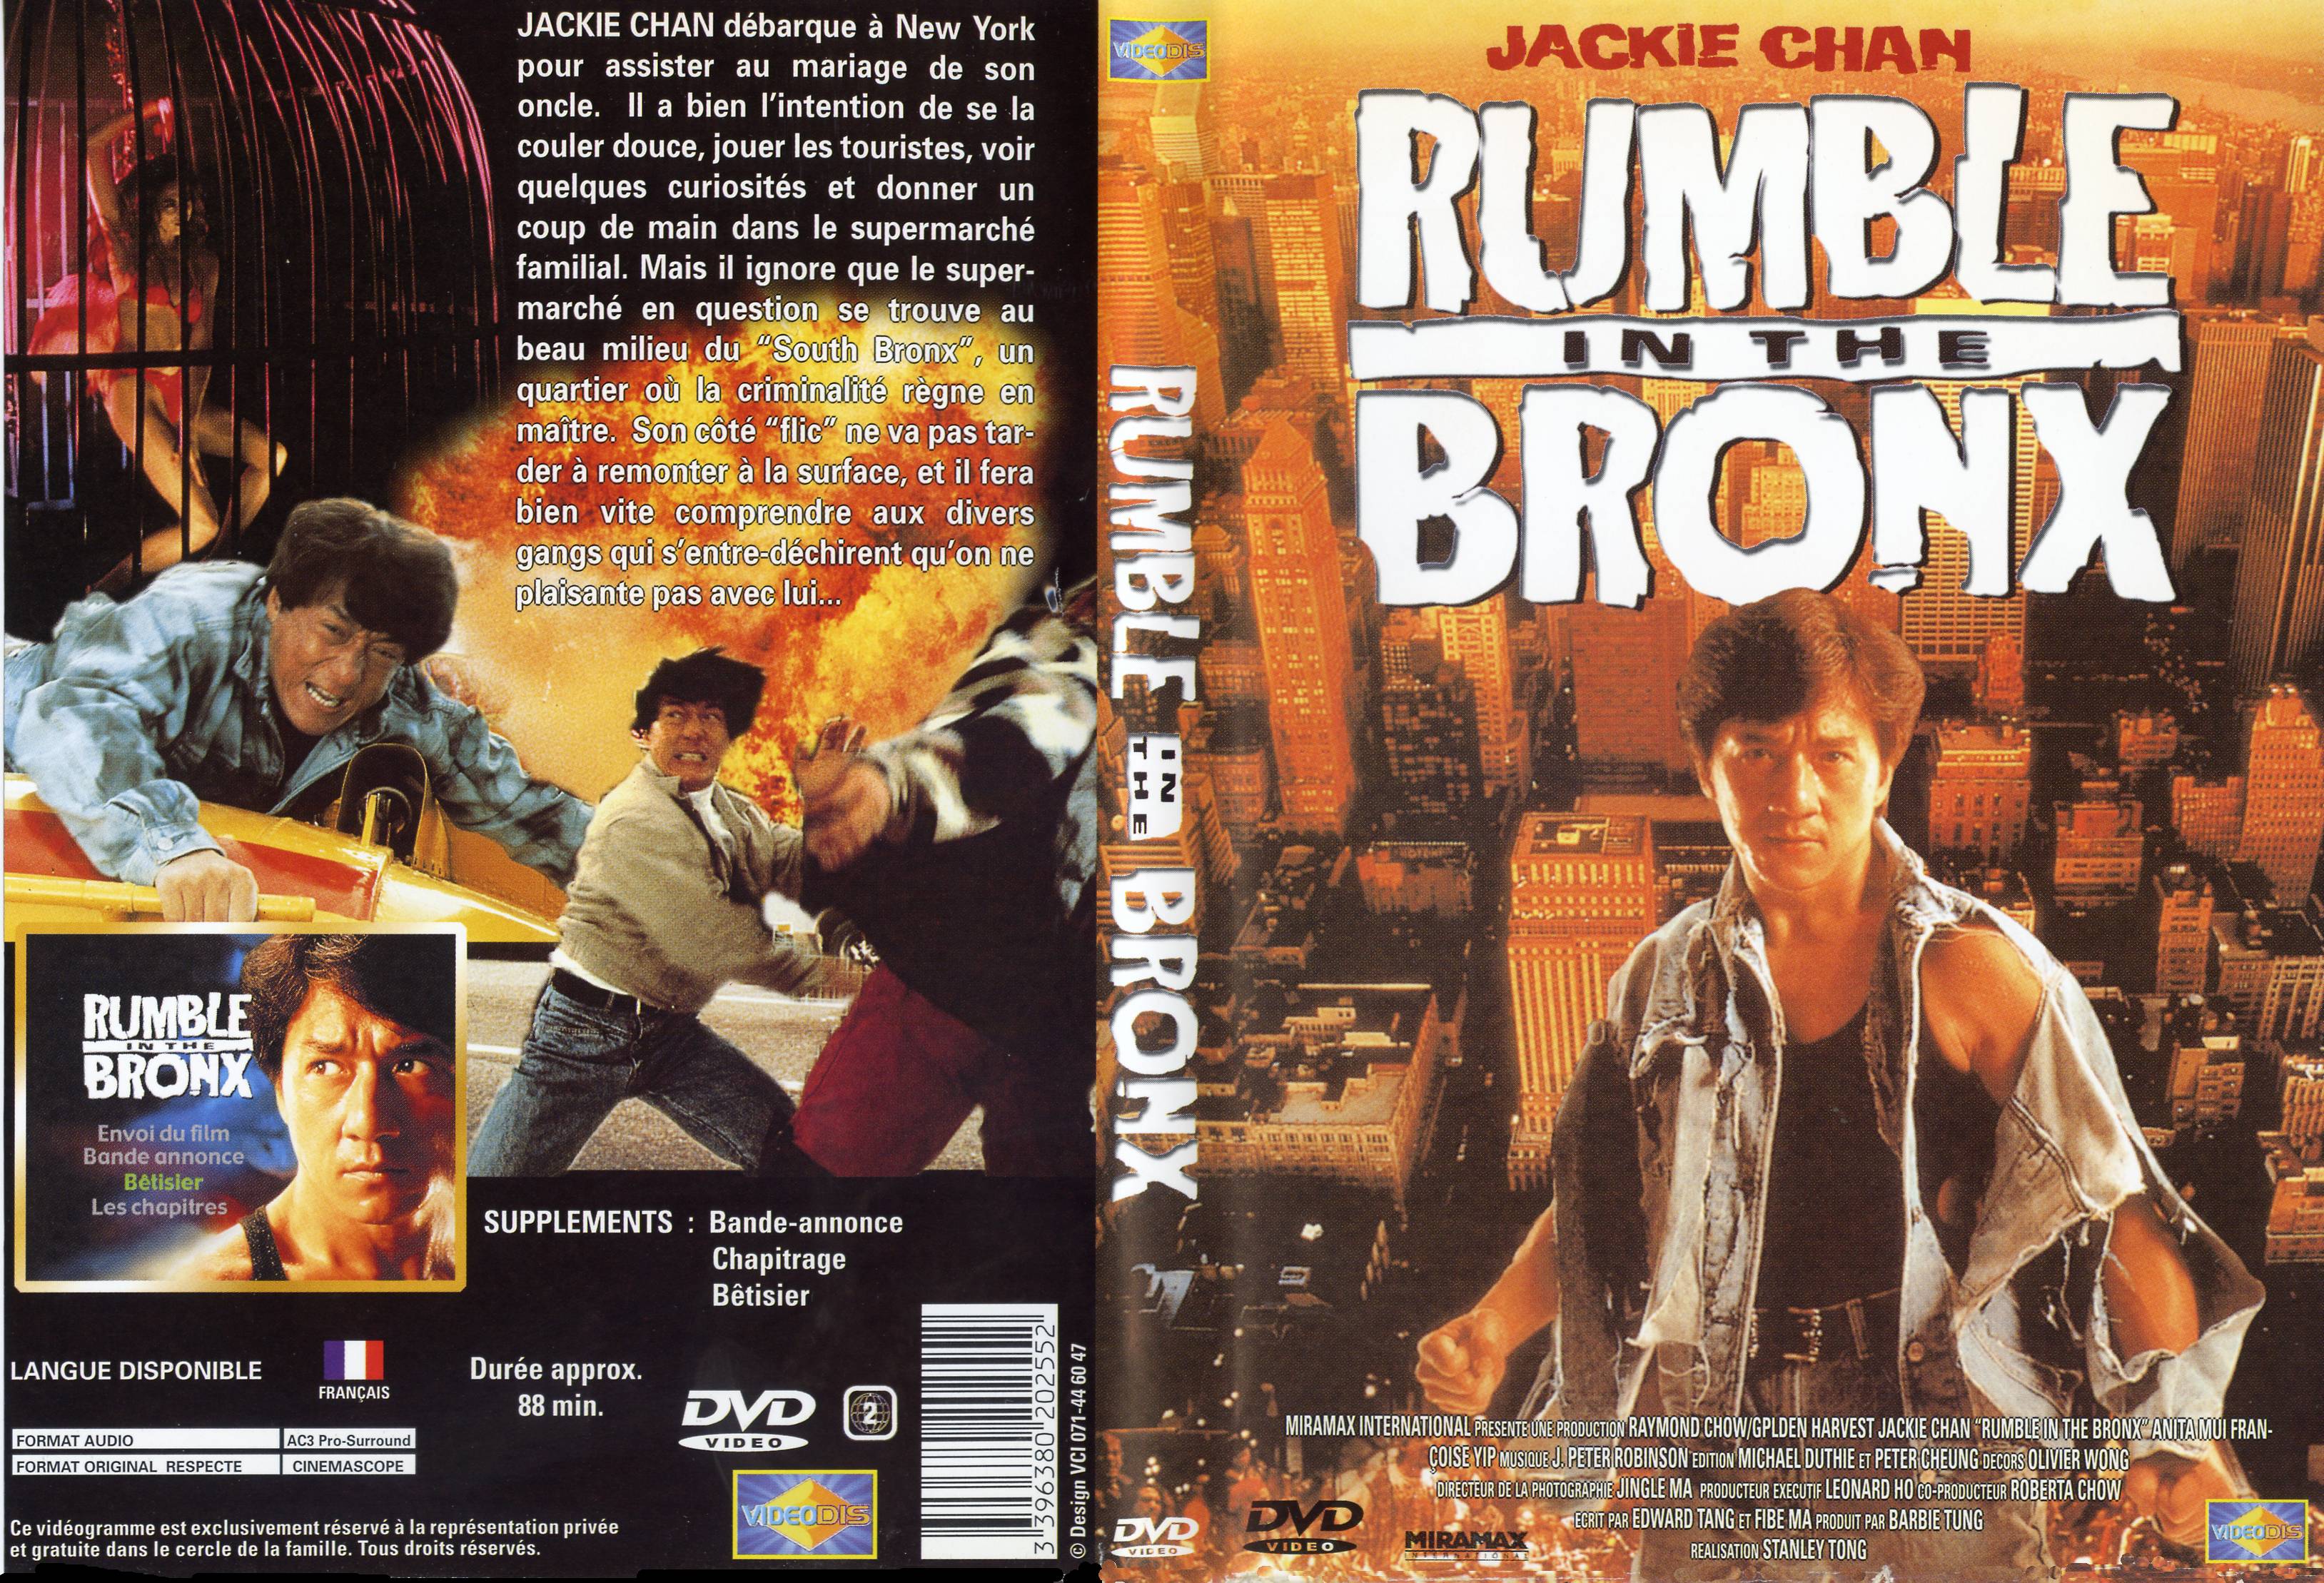 Jaquette DVD Rumble in the bronx